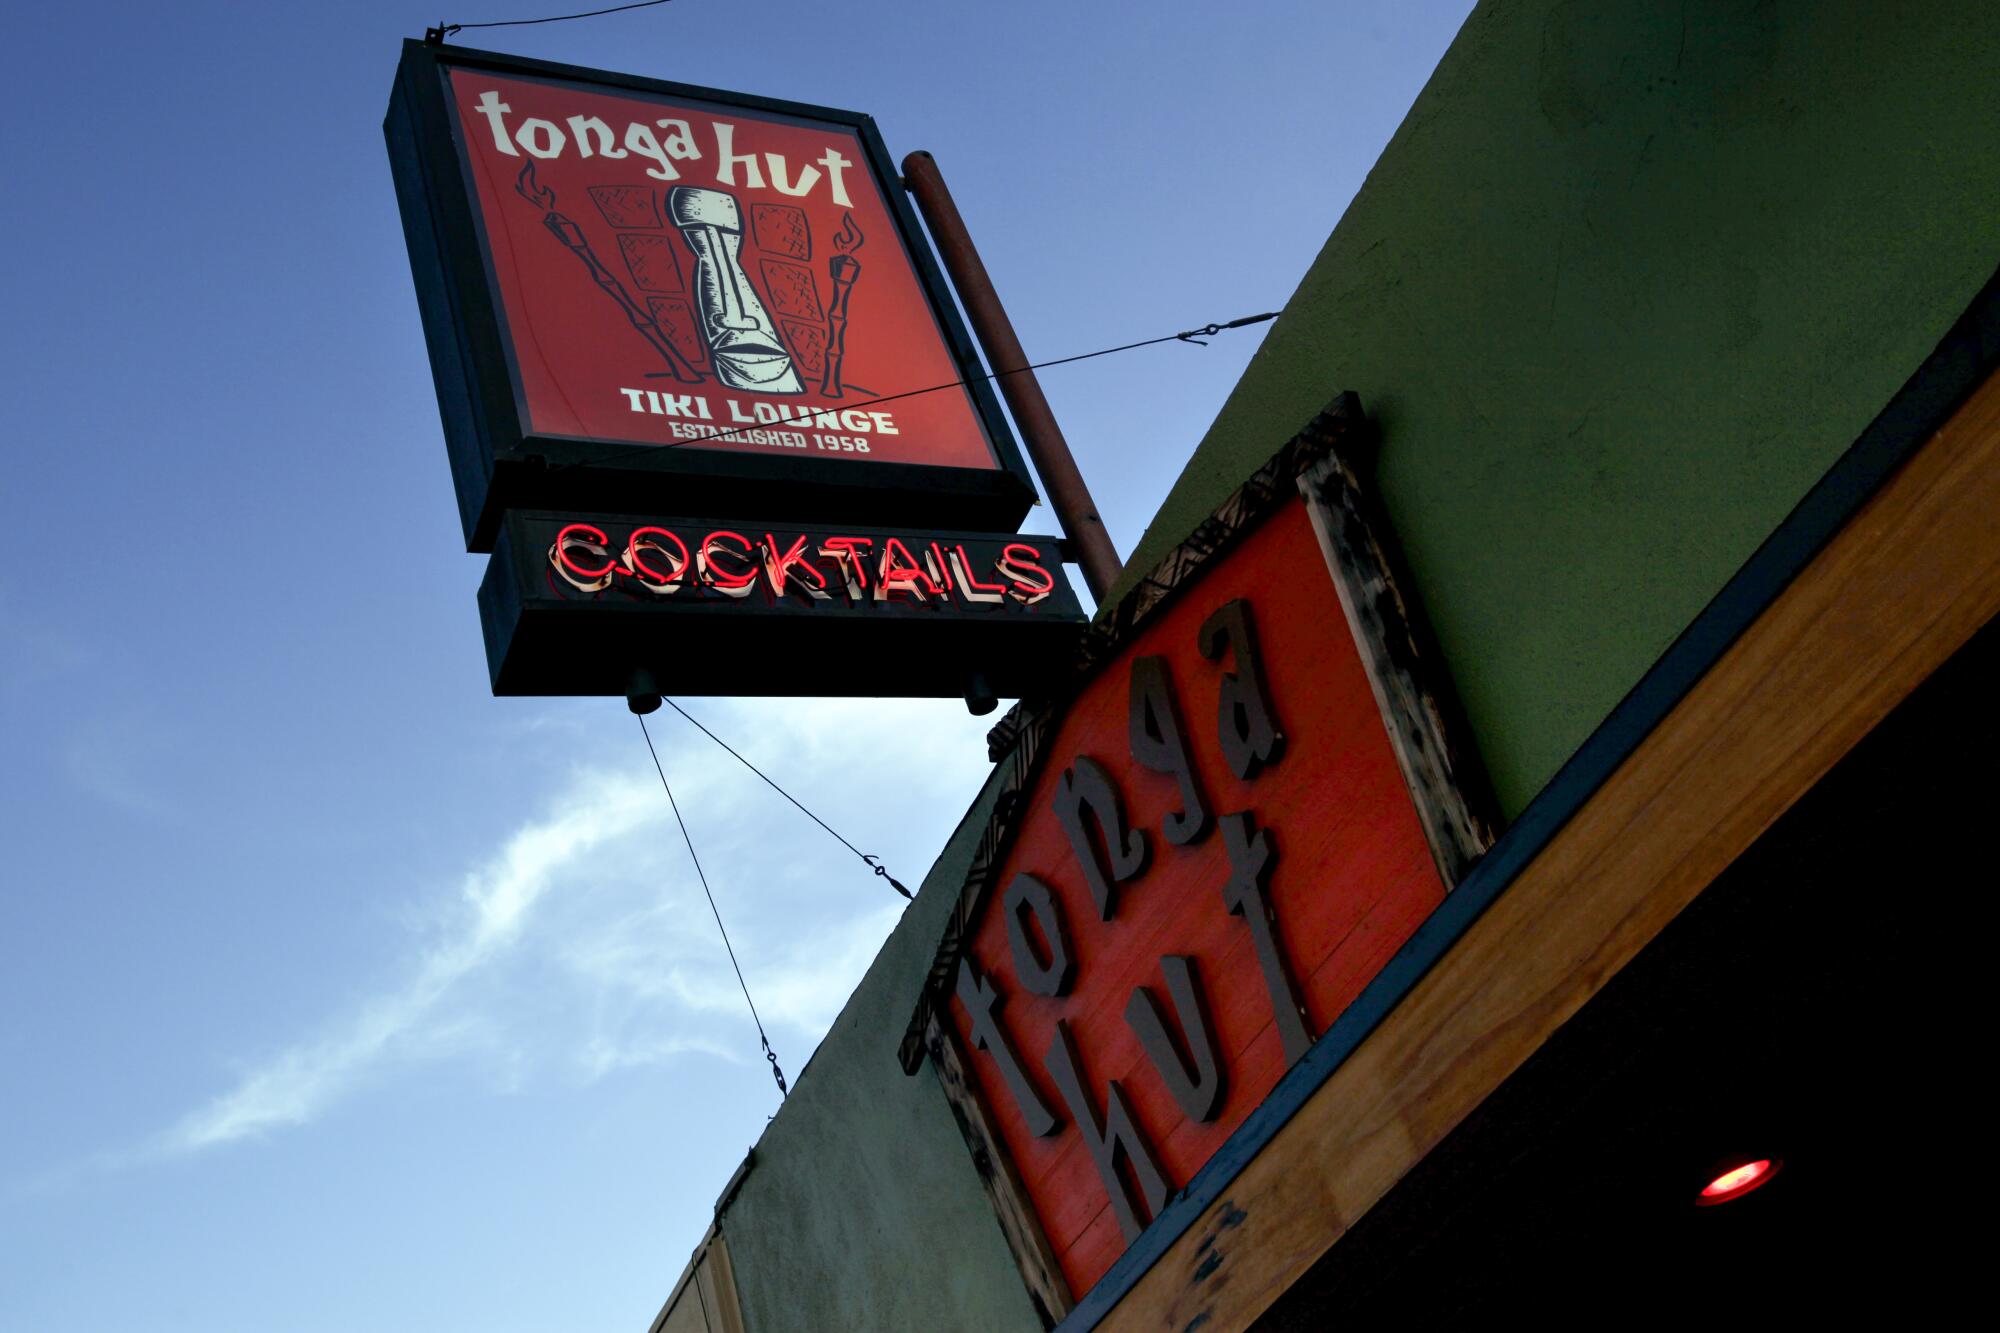 The Tonga Hut in North Hollywood in 2013. 